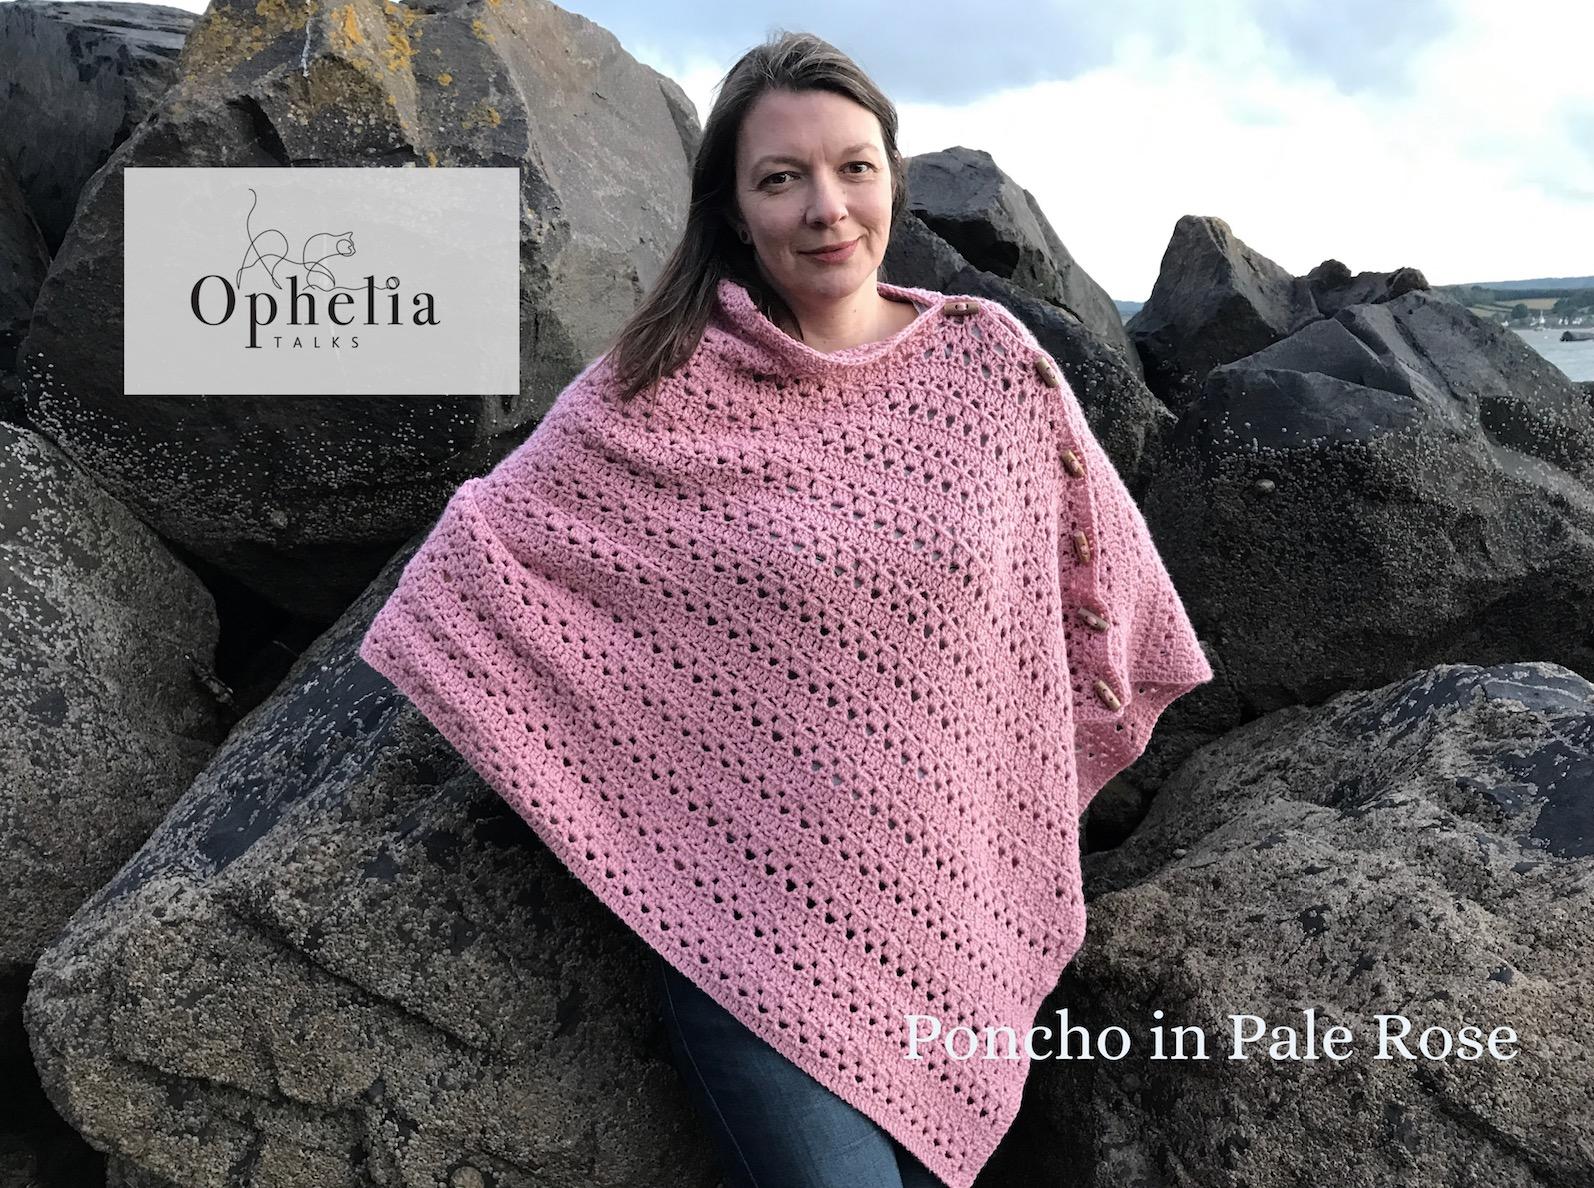 Poncho in pale rose